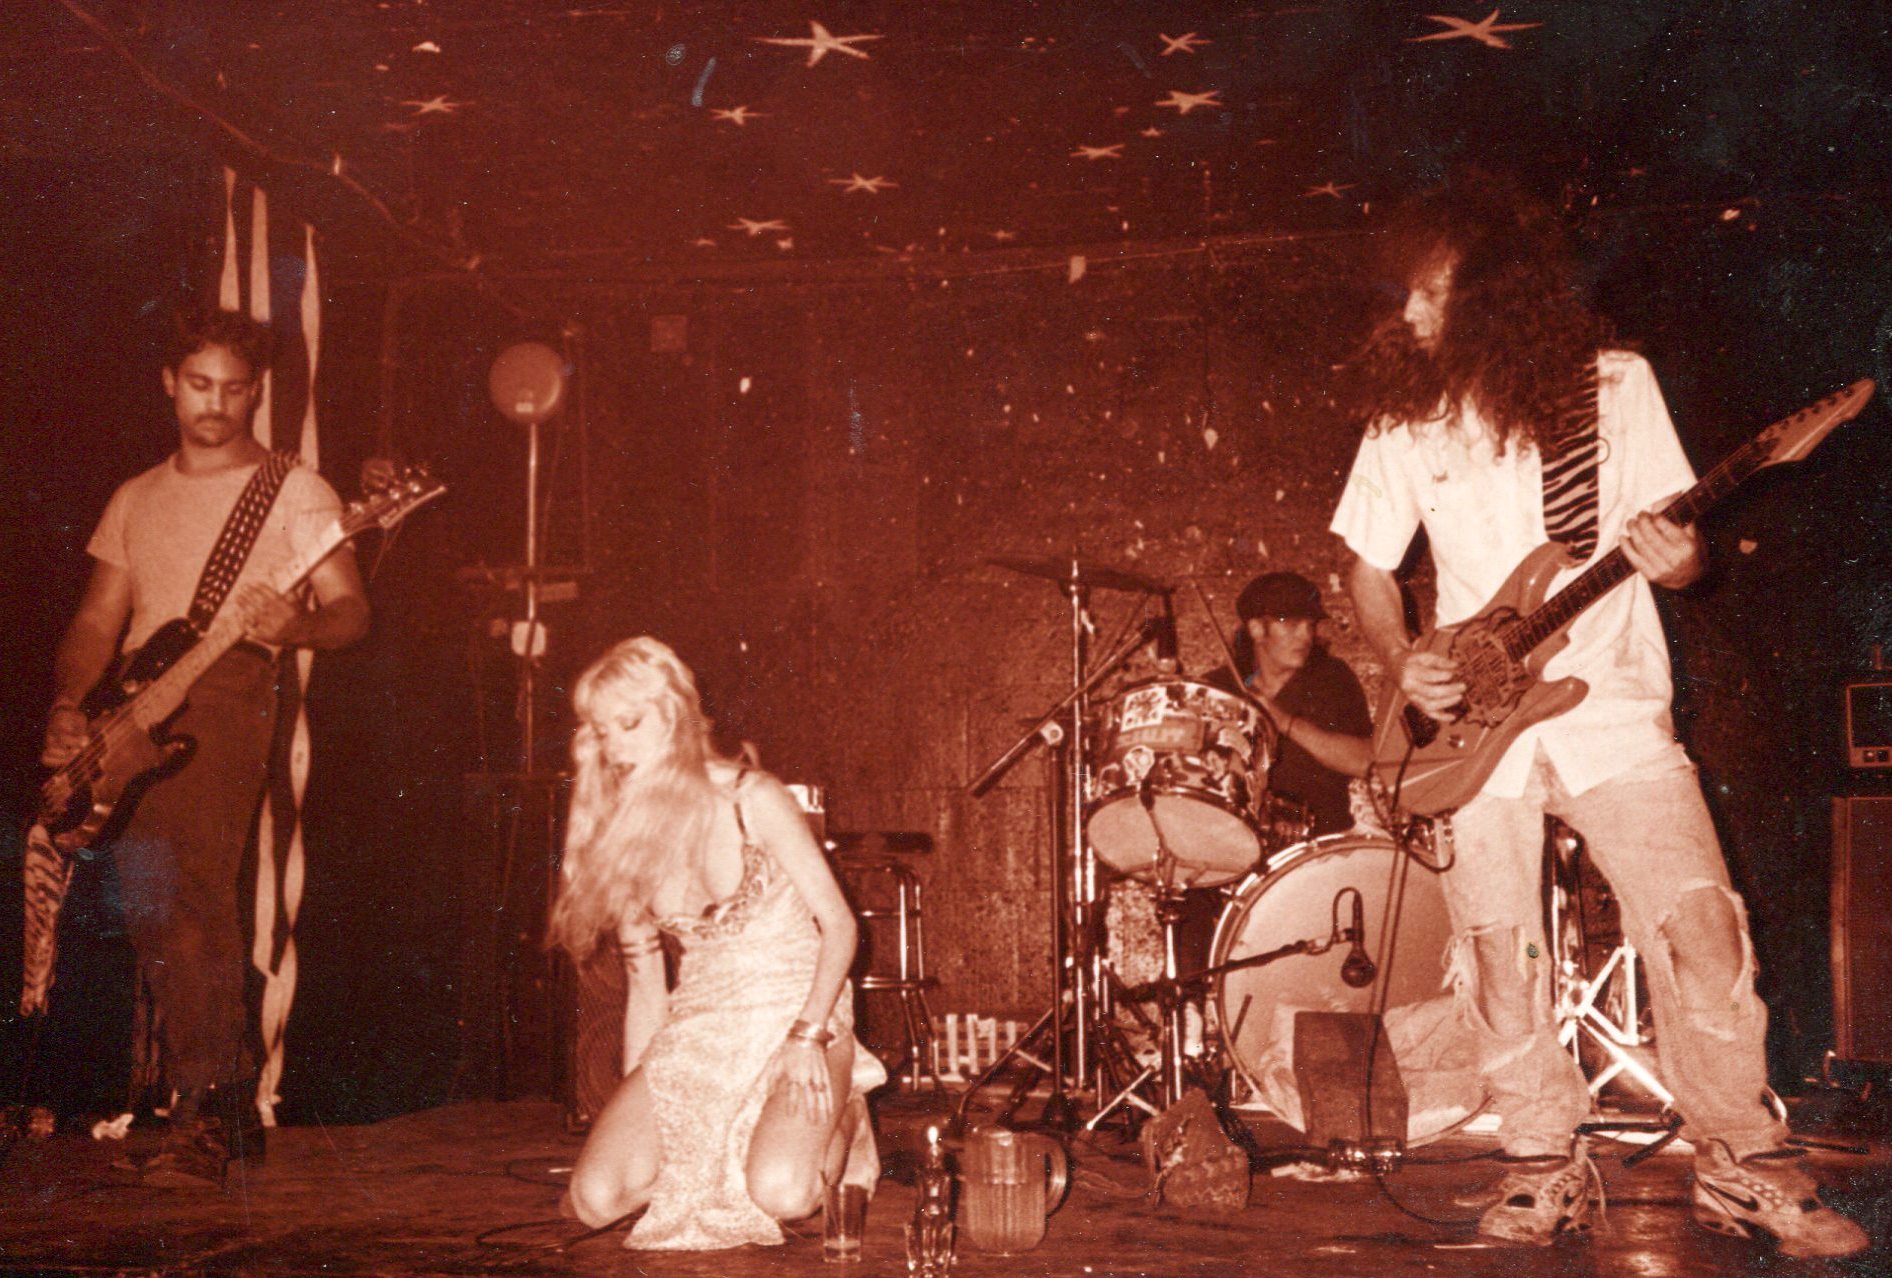 Farrah Fires past as lead singer of 'Deep Space' the band live at the Pyramid Club in NYC 1990